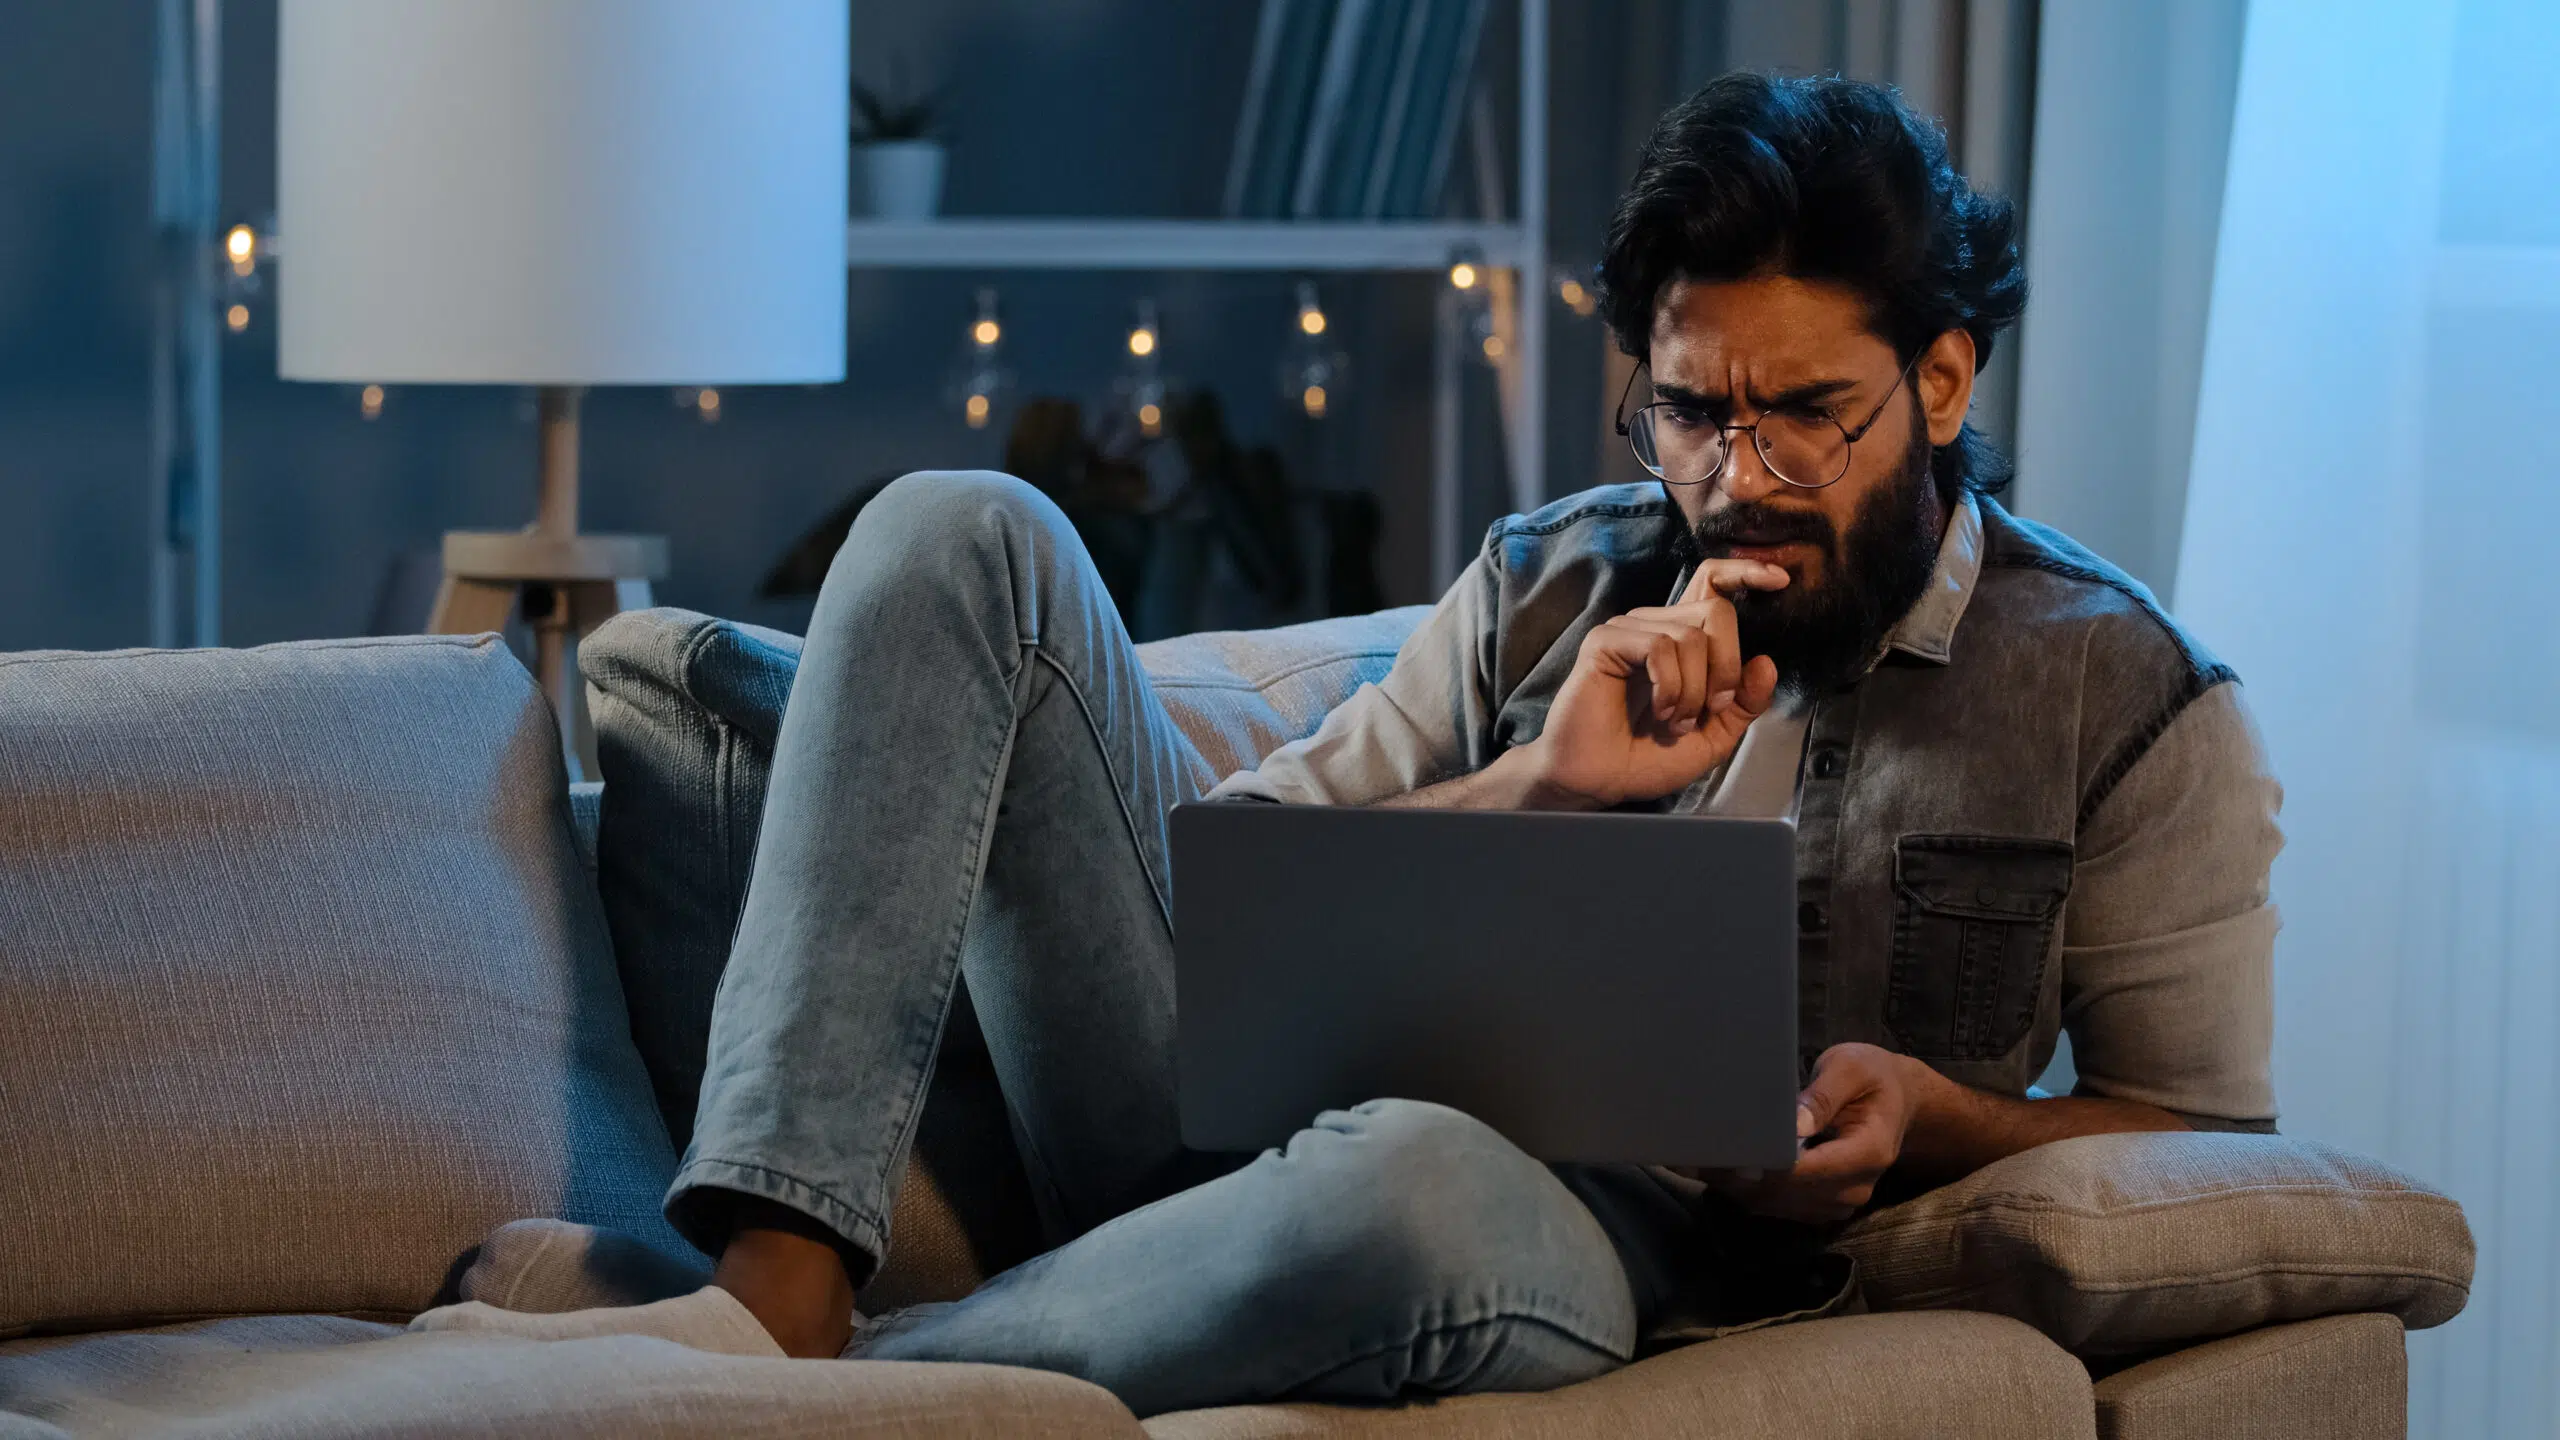 Bearded man wearing glasses sitting on sofa late at night with laptop 